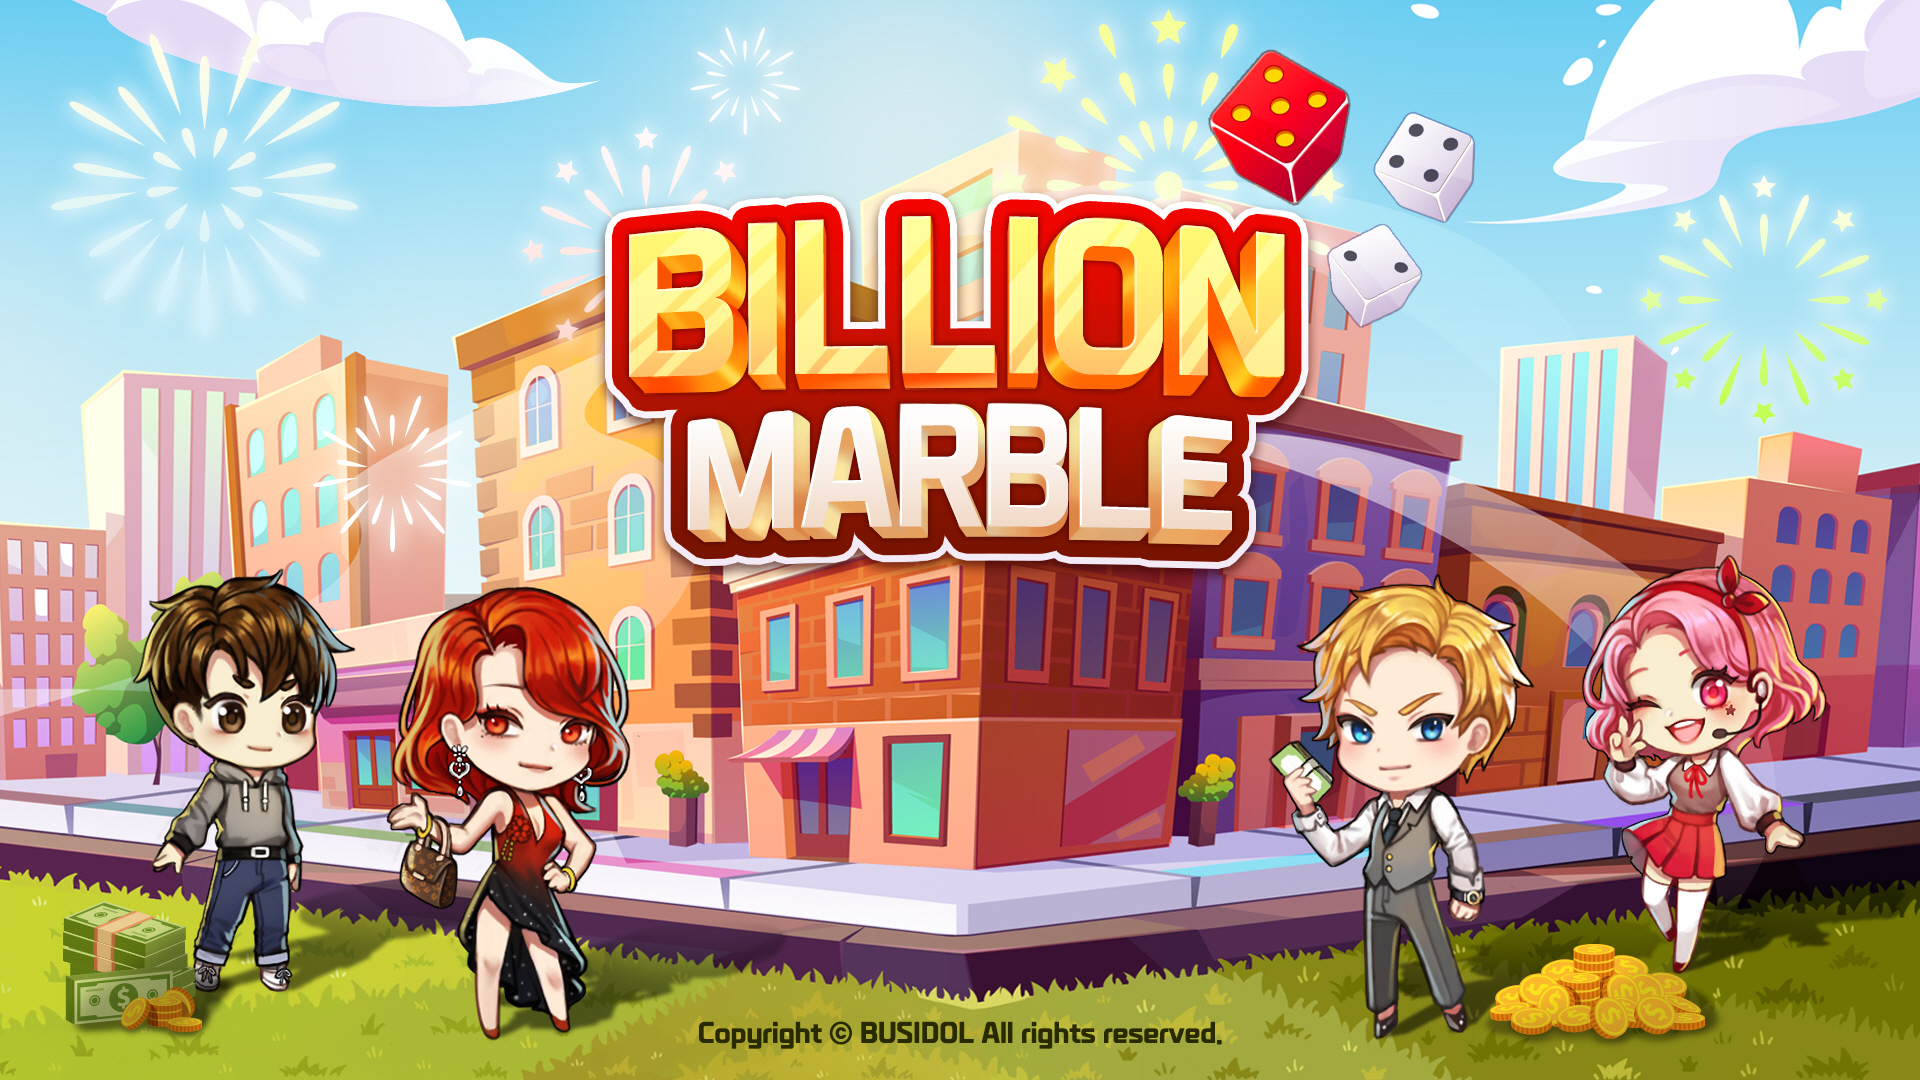 The main screen of the game Billion Marble, featuring four animated characters standing in front of colorful buildings.